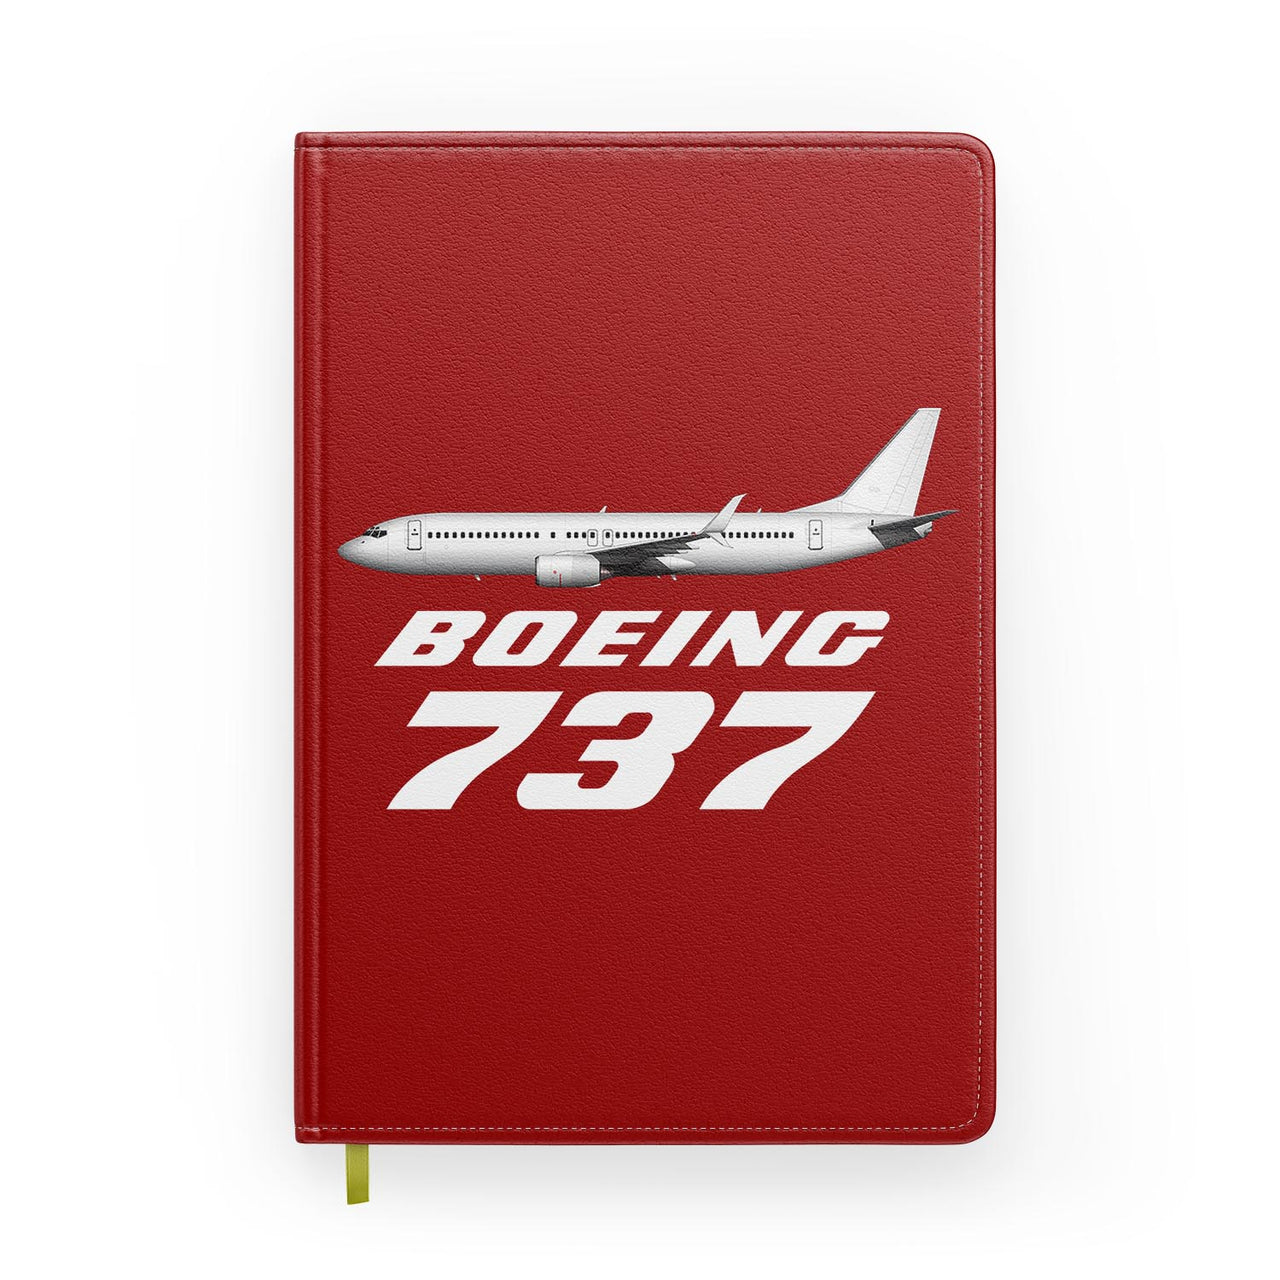 The Boeing 737 Designed Notebooks